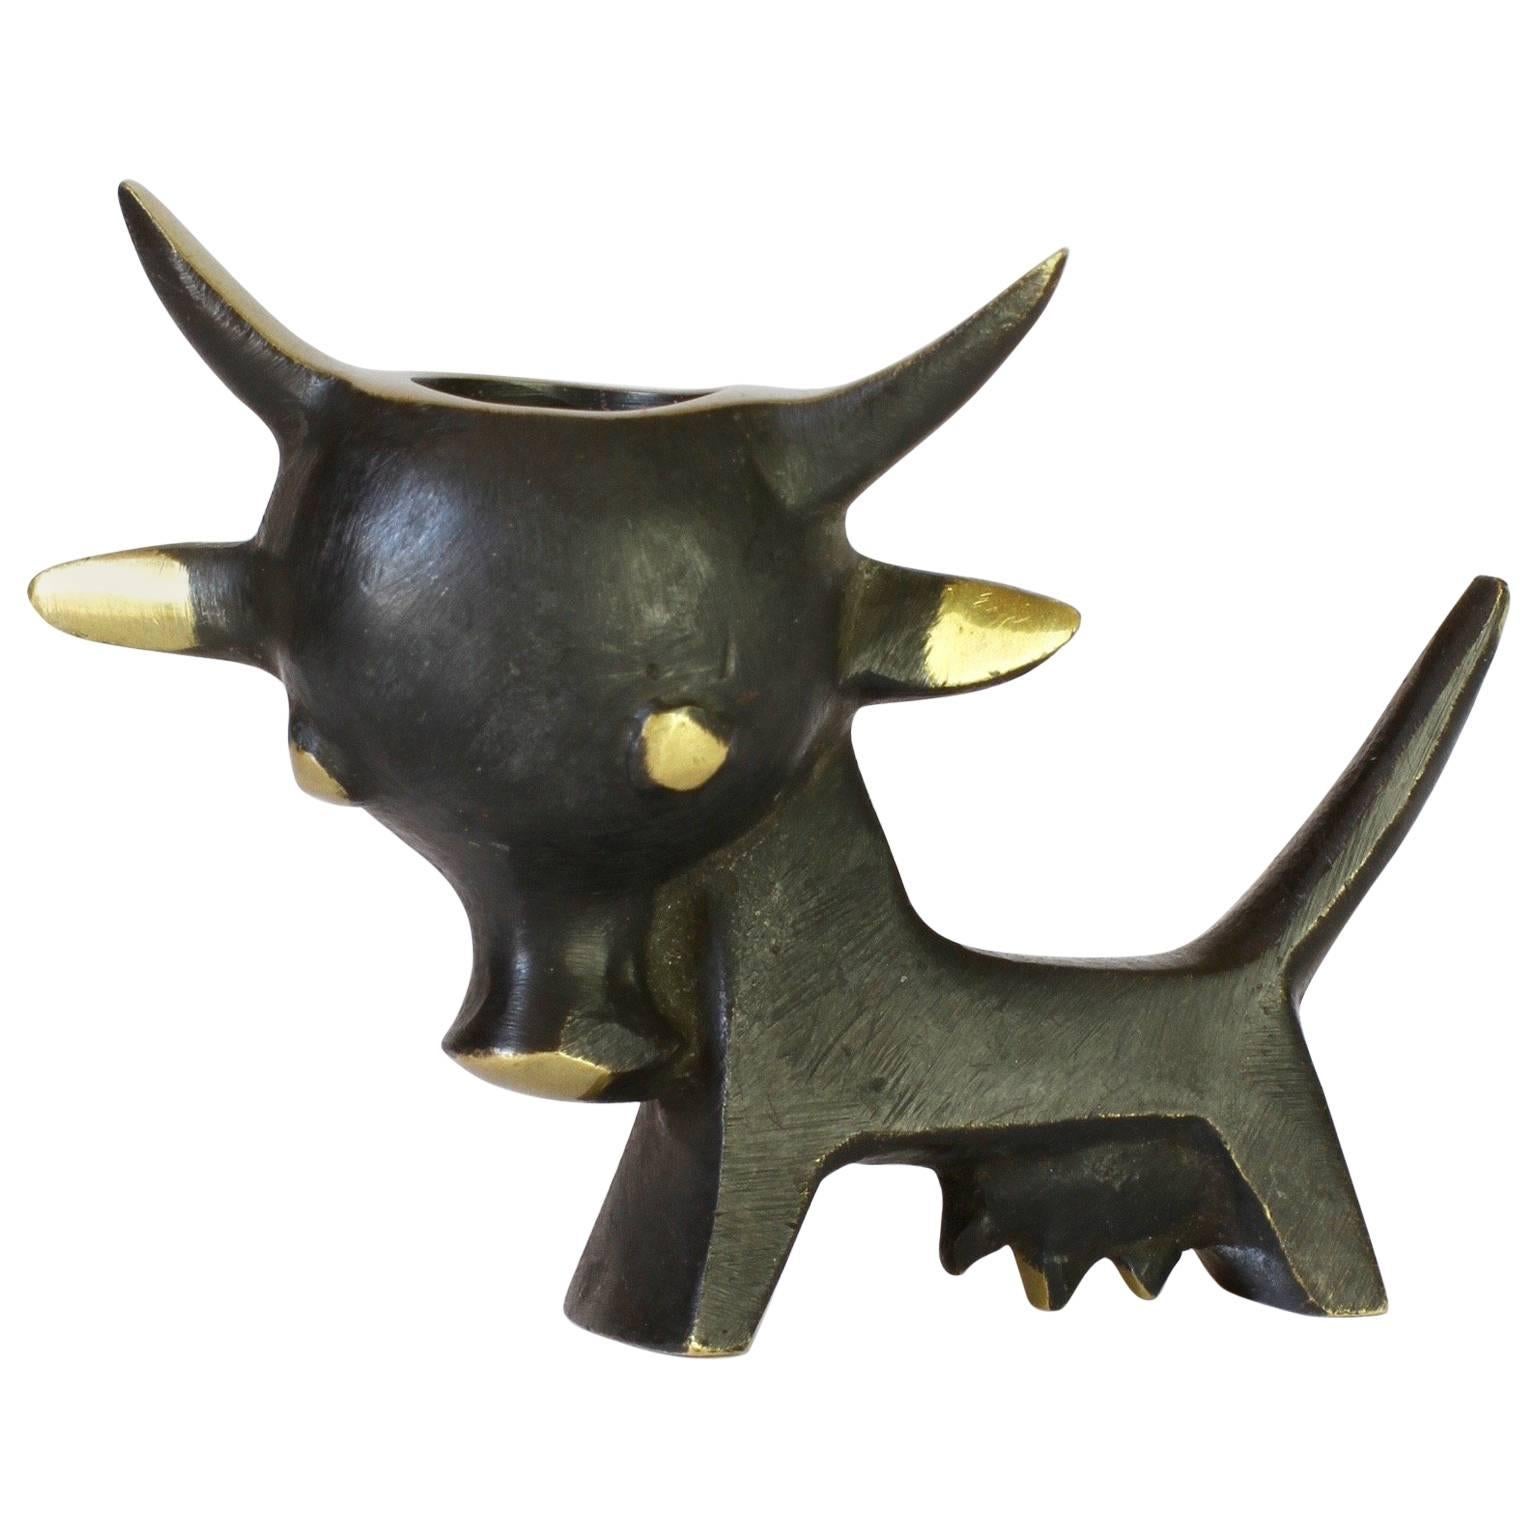 Whimsical Brass Cow Toothpick Holder by Walter Bosse for Baller, circa 1950s